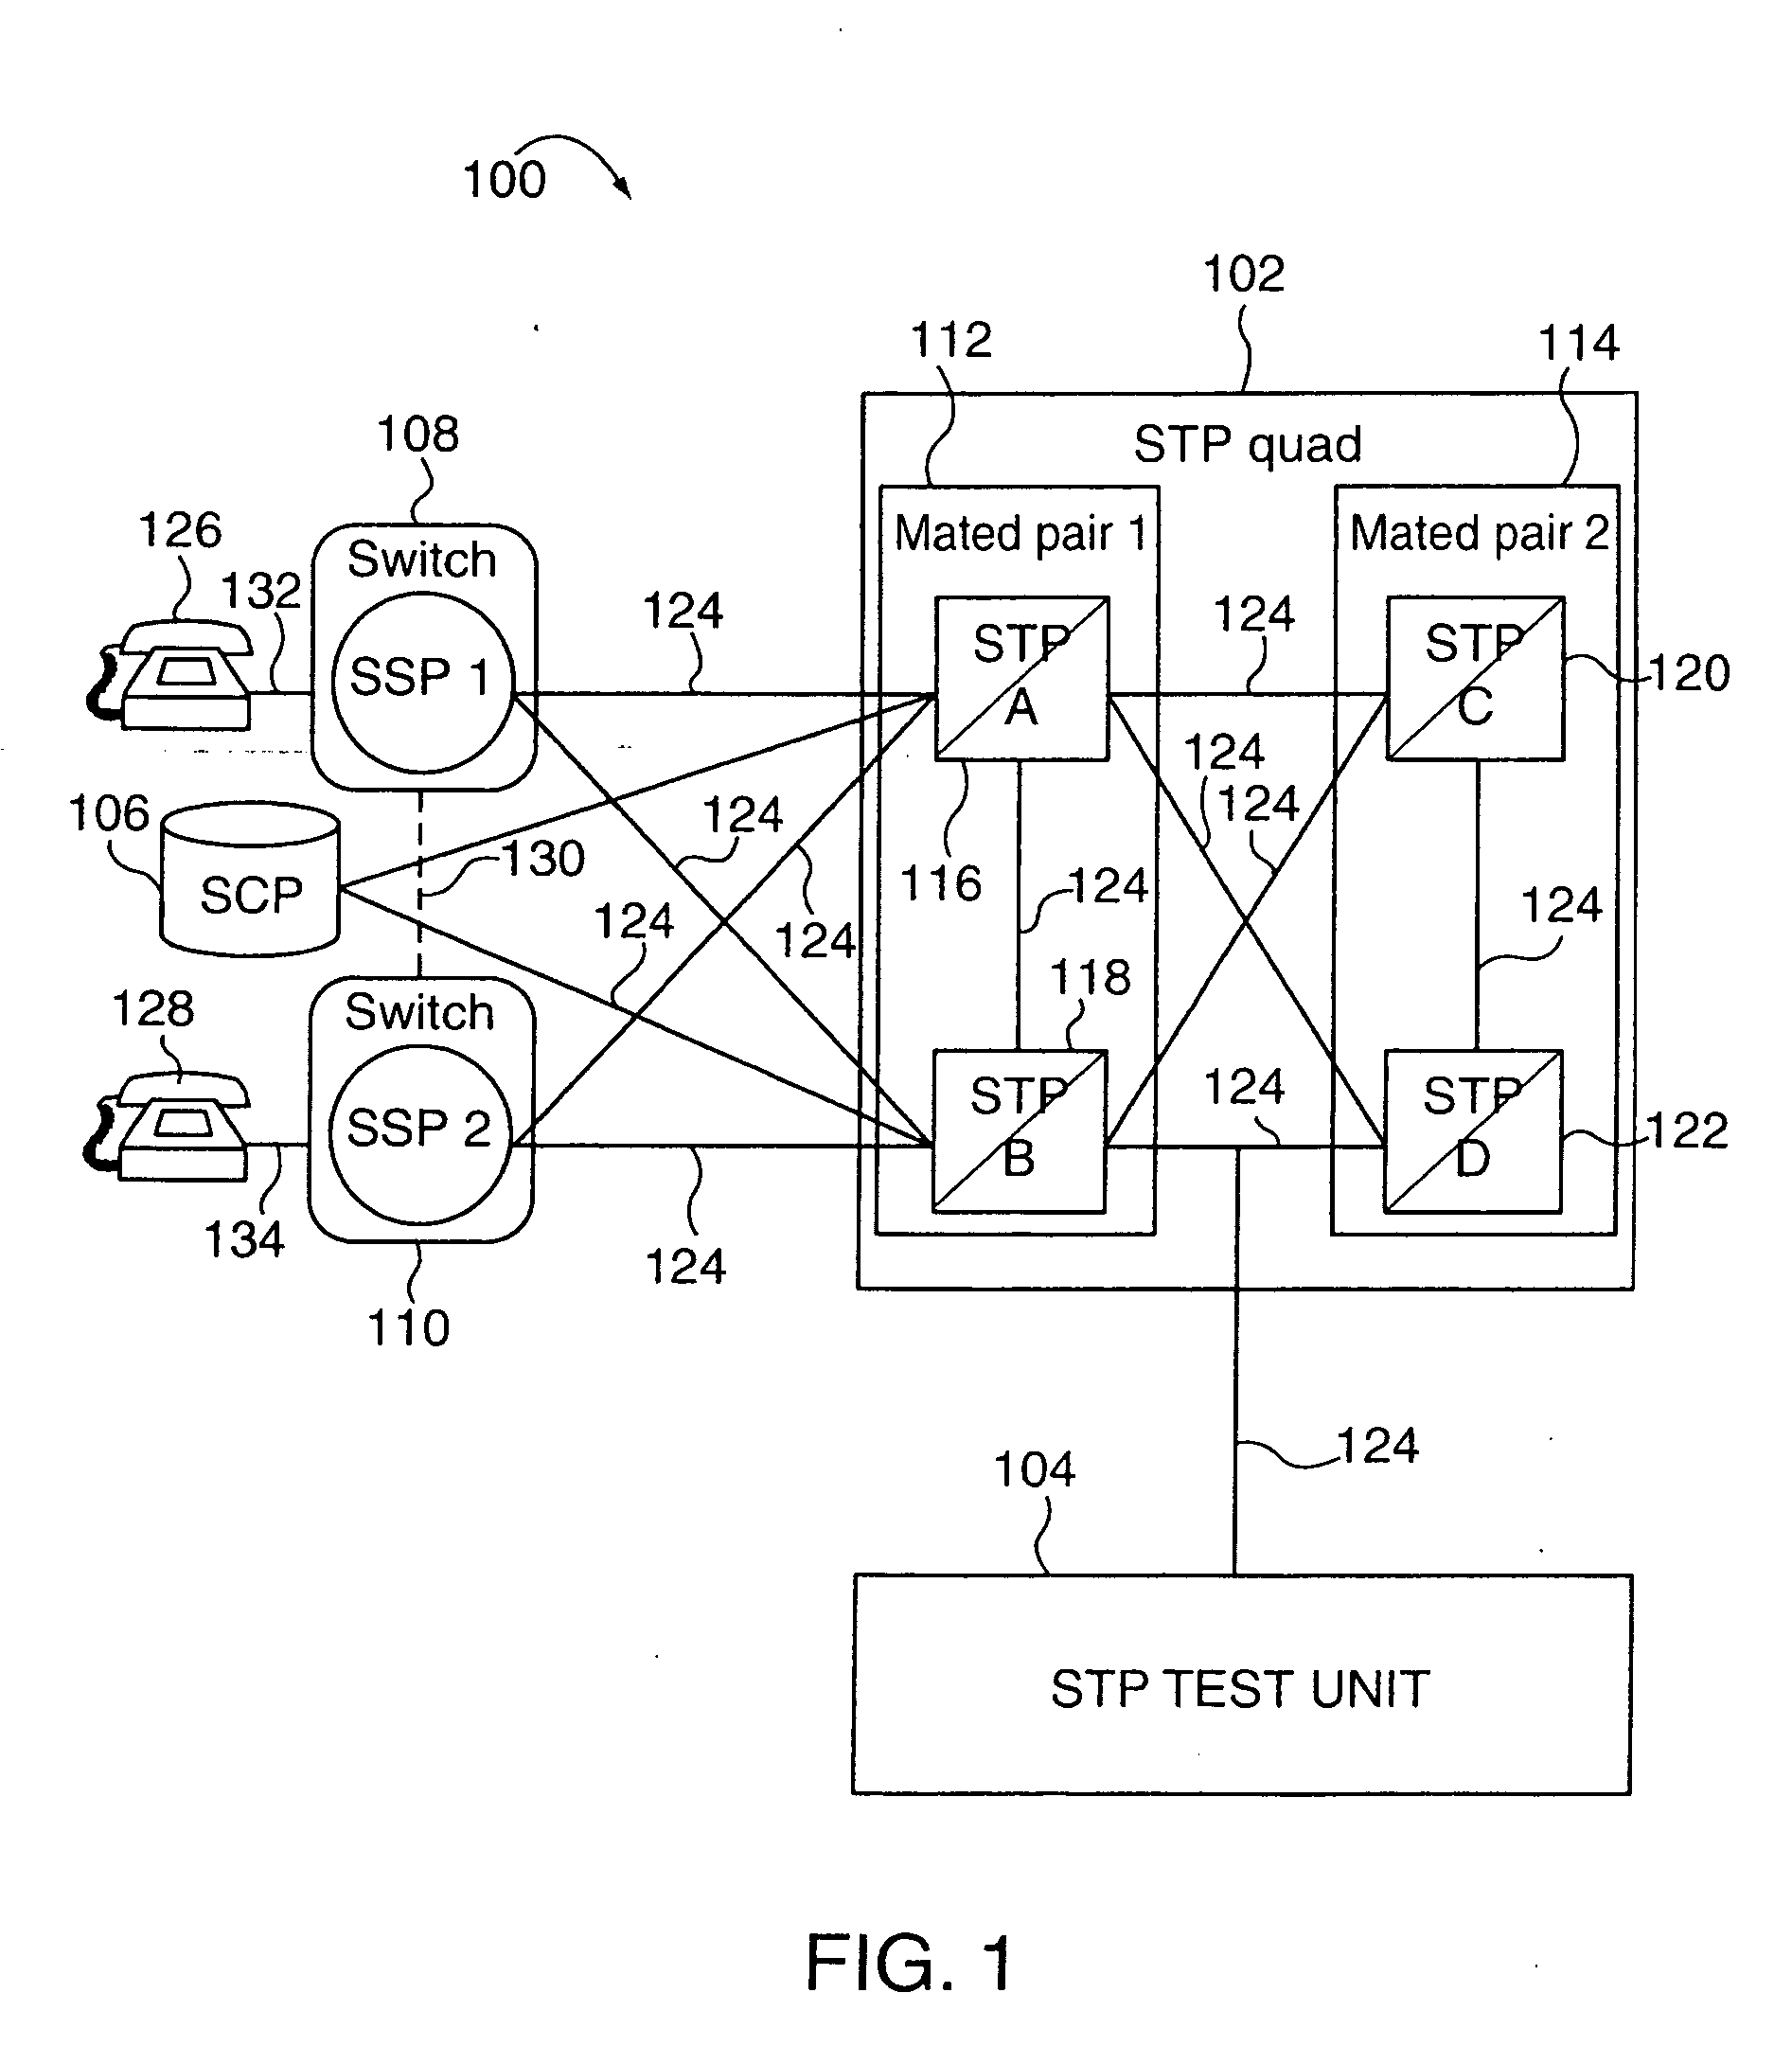 Methods and apparatus for automating testing of signalling transfer points